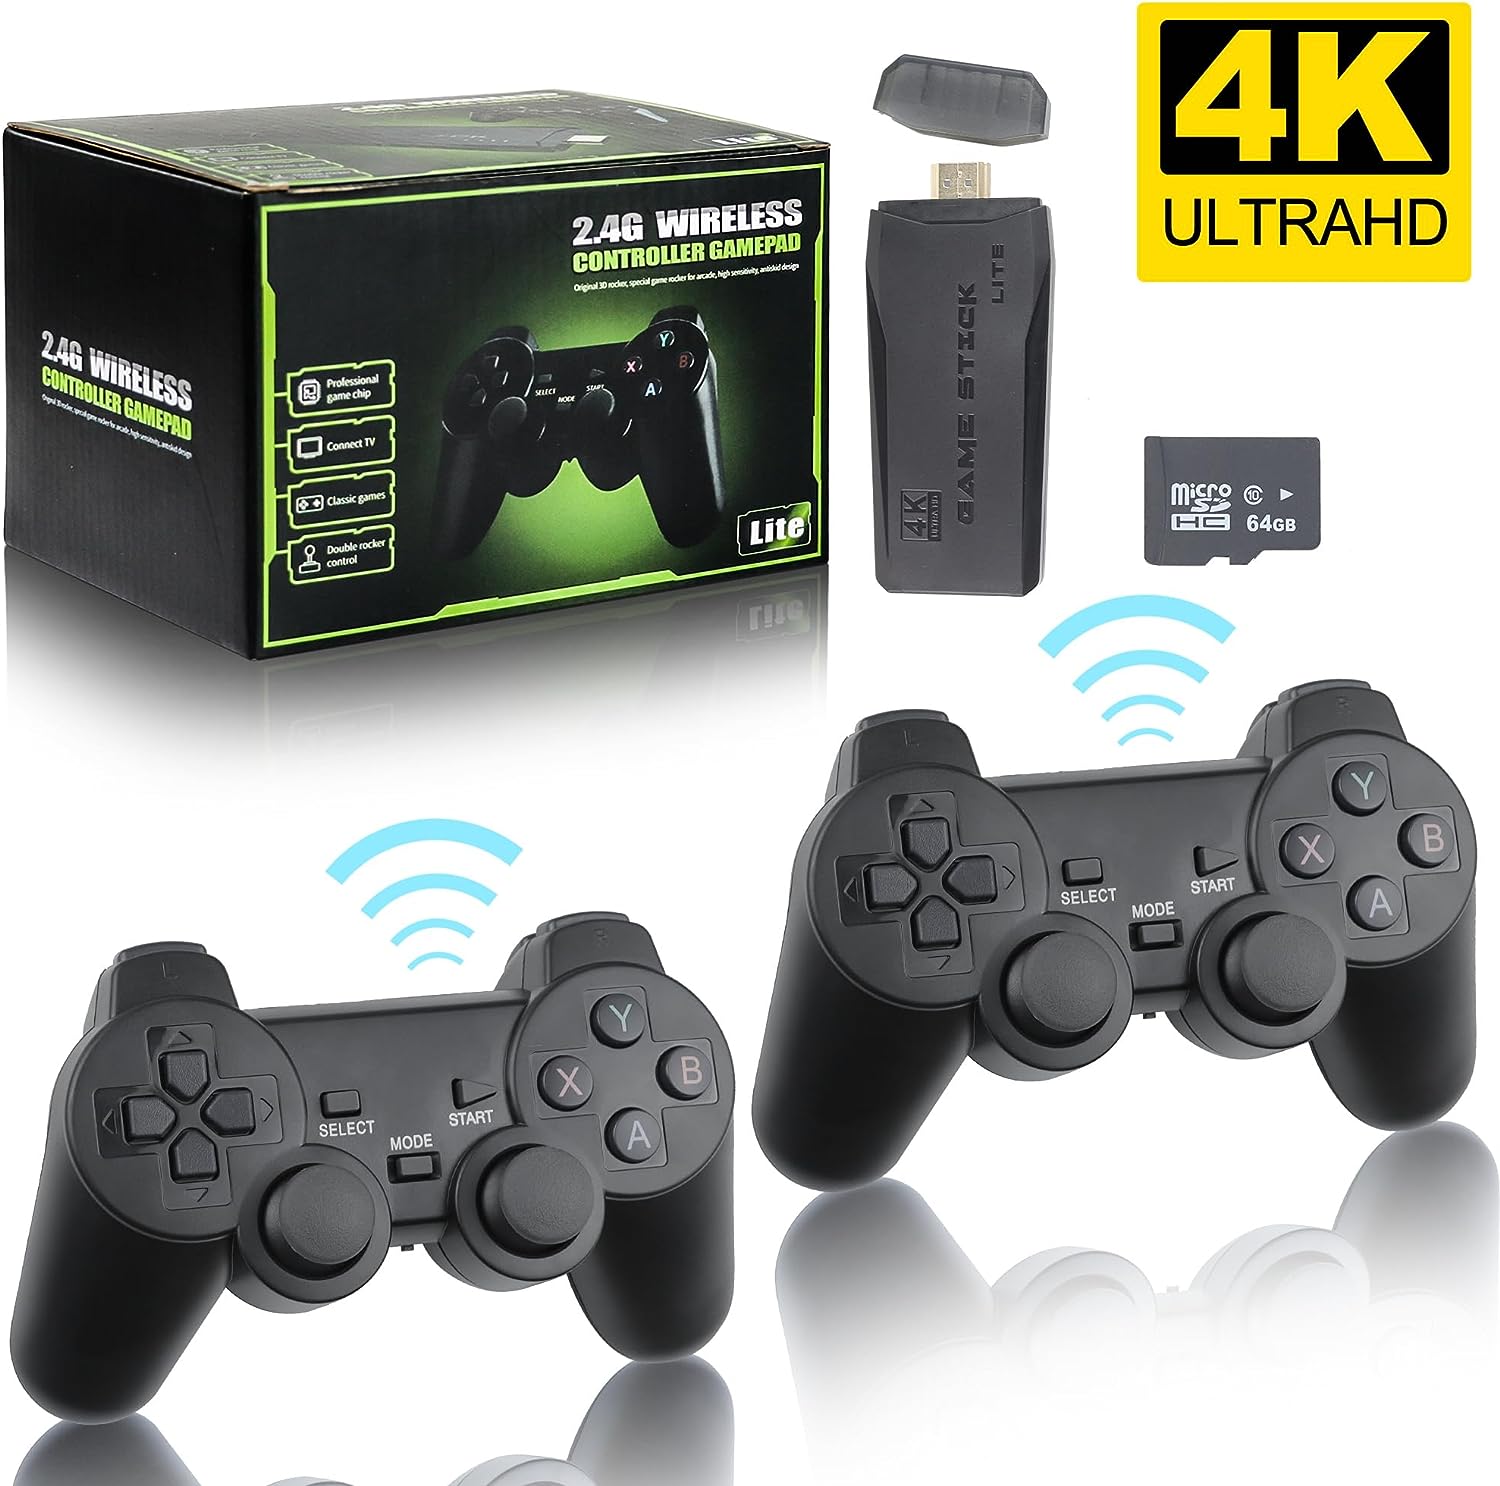 Retro Game Stick – Revisit Classic Games with Built-in 9 Emulators, 20,000+ Games, 4K HDMI Output, and 2.4GHz Wireless Controller for TV Plug and Play